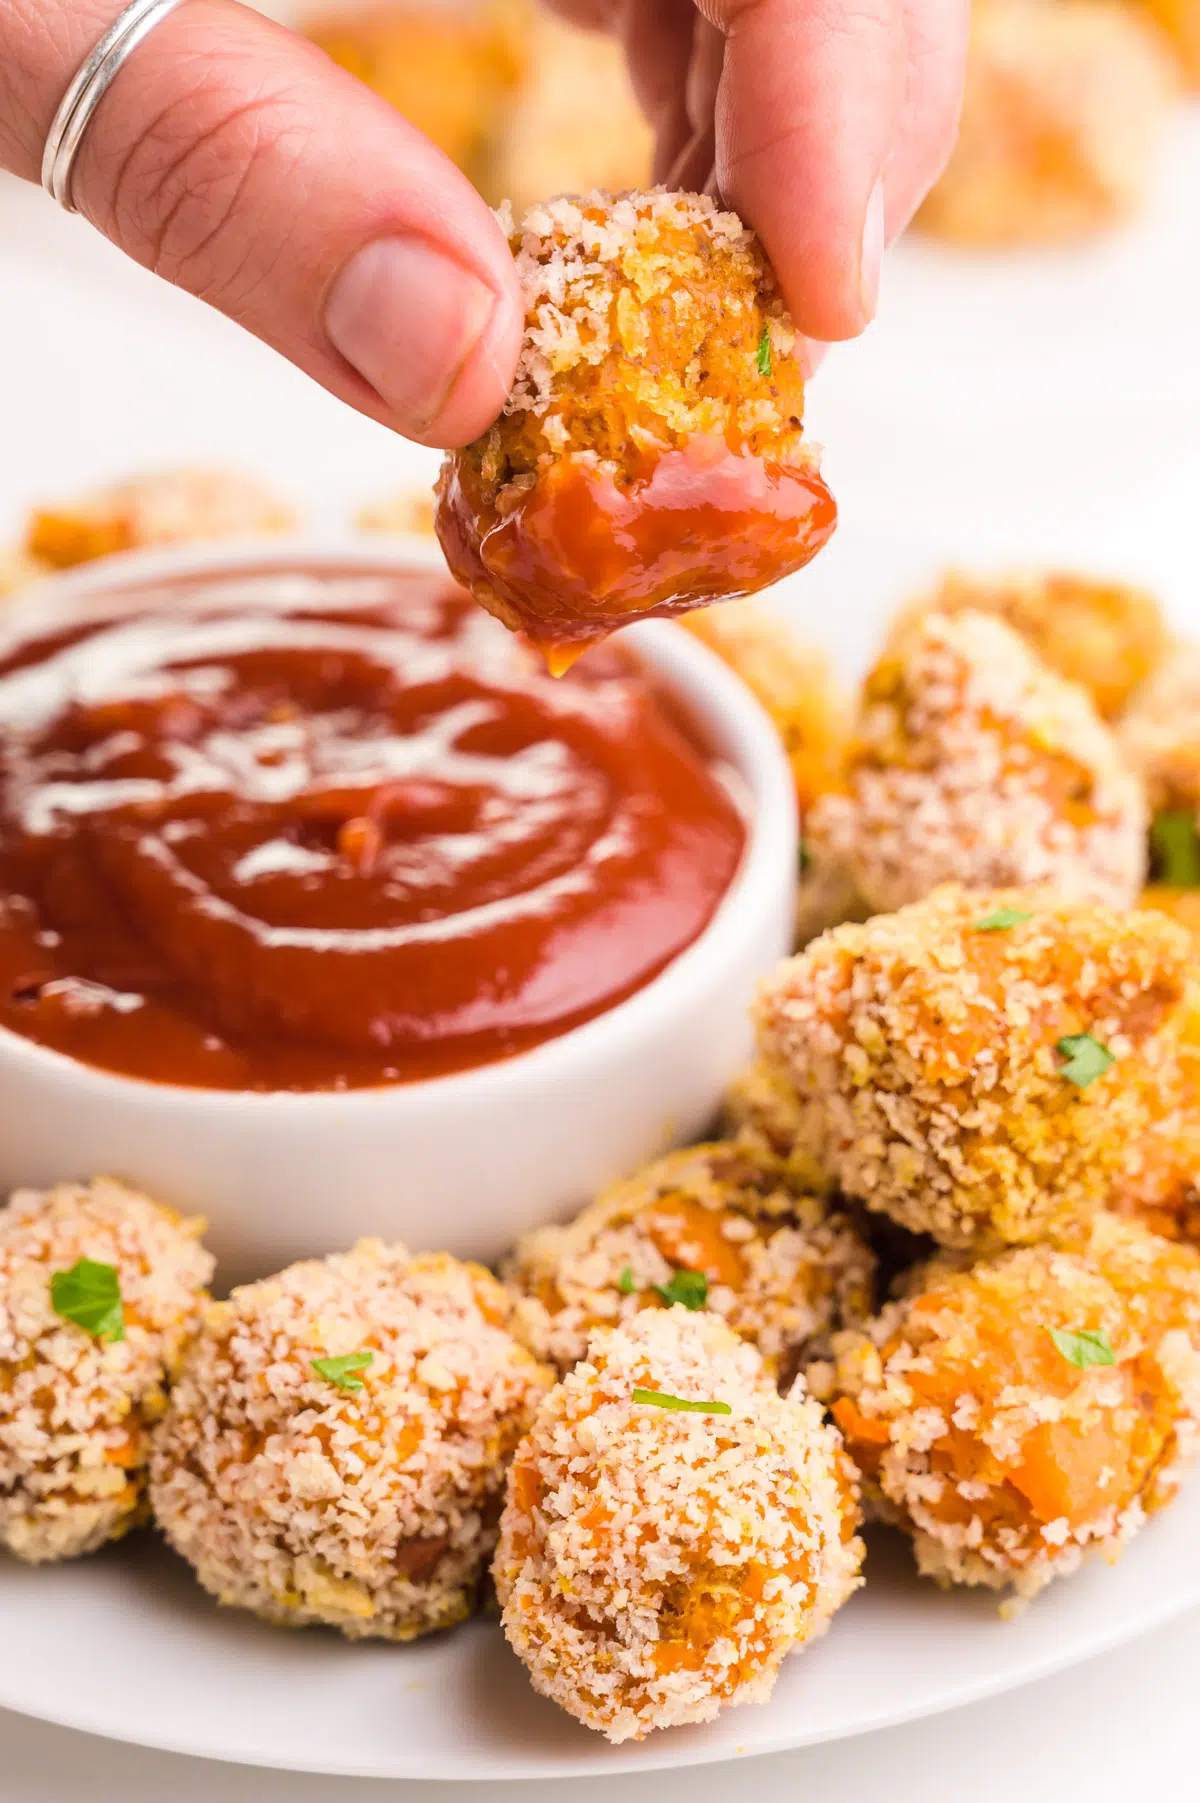 A hand holds a sweet potato  tater tot dipped in ketchup, dangling over a plate with more tater tots and a bowl of ketchup.